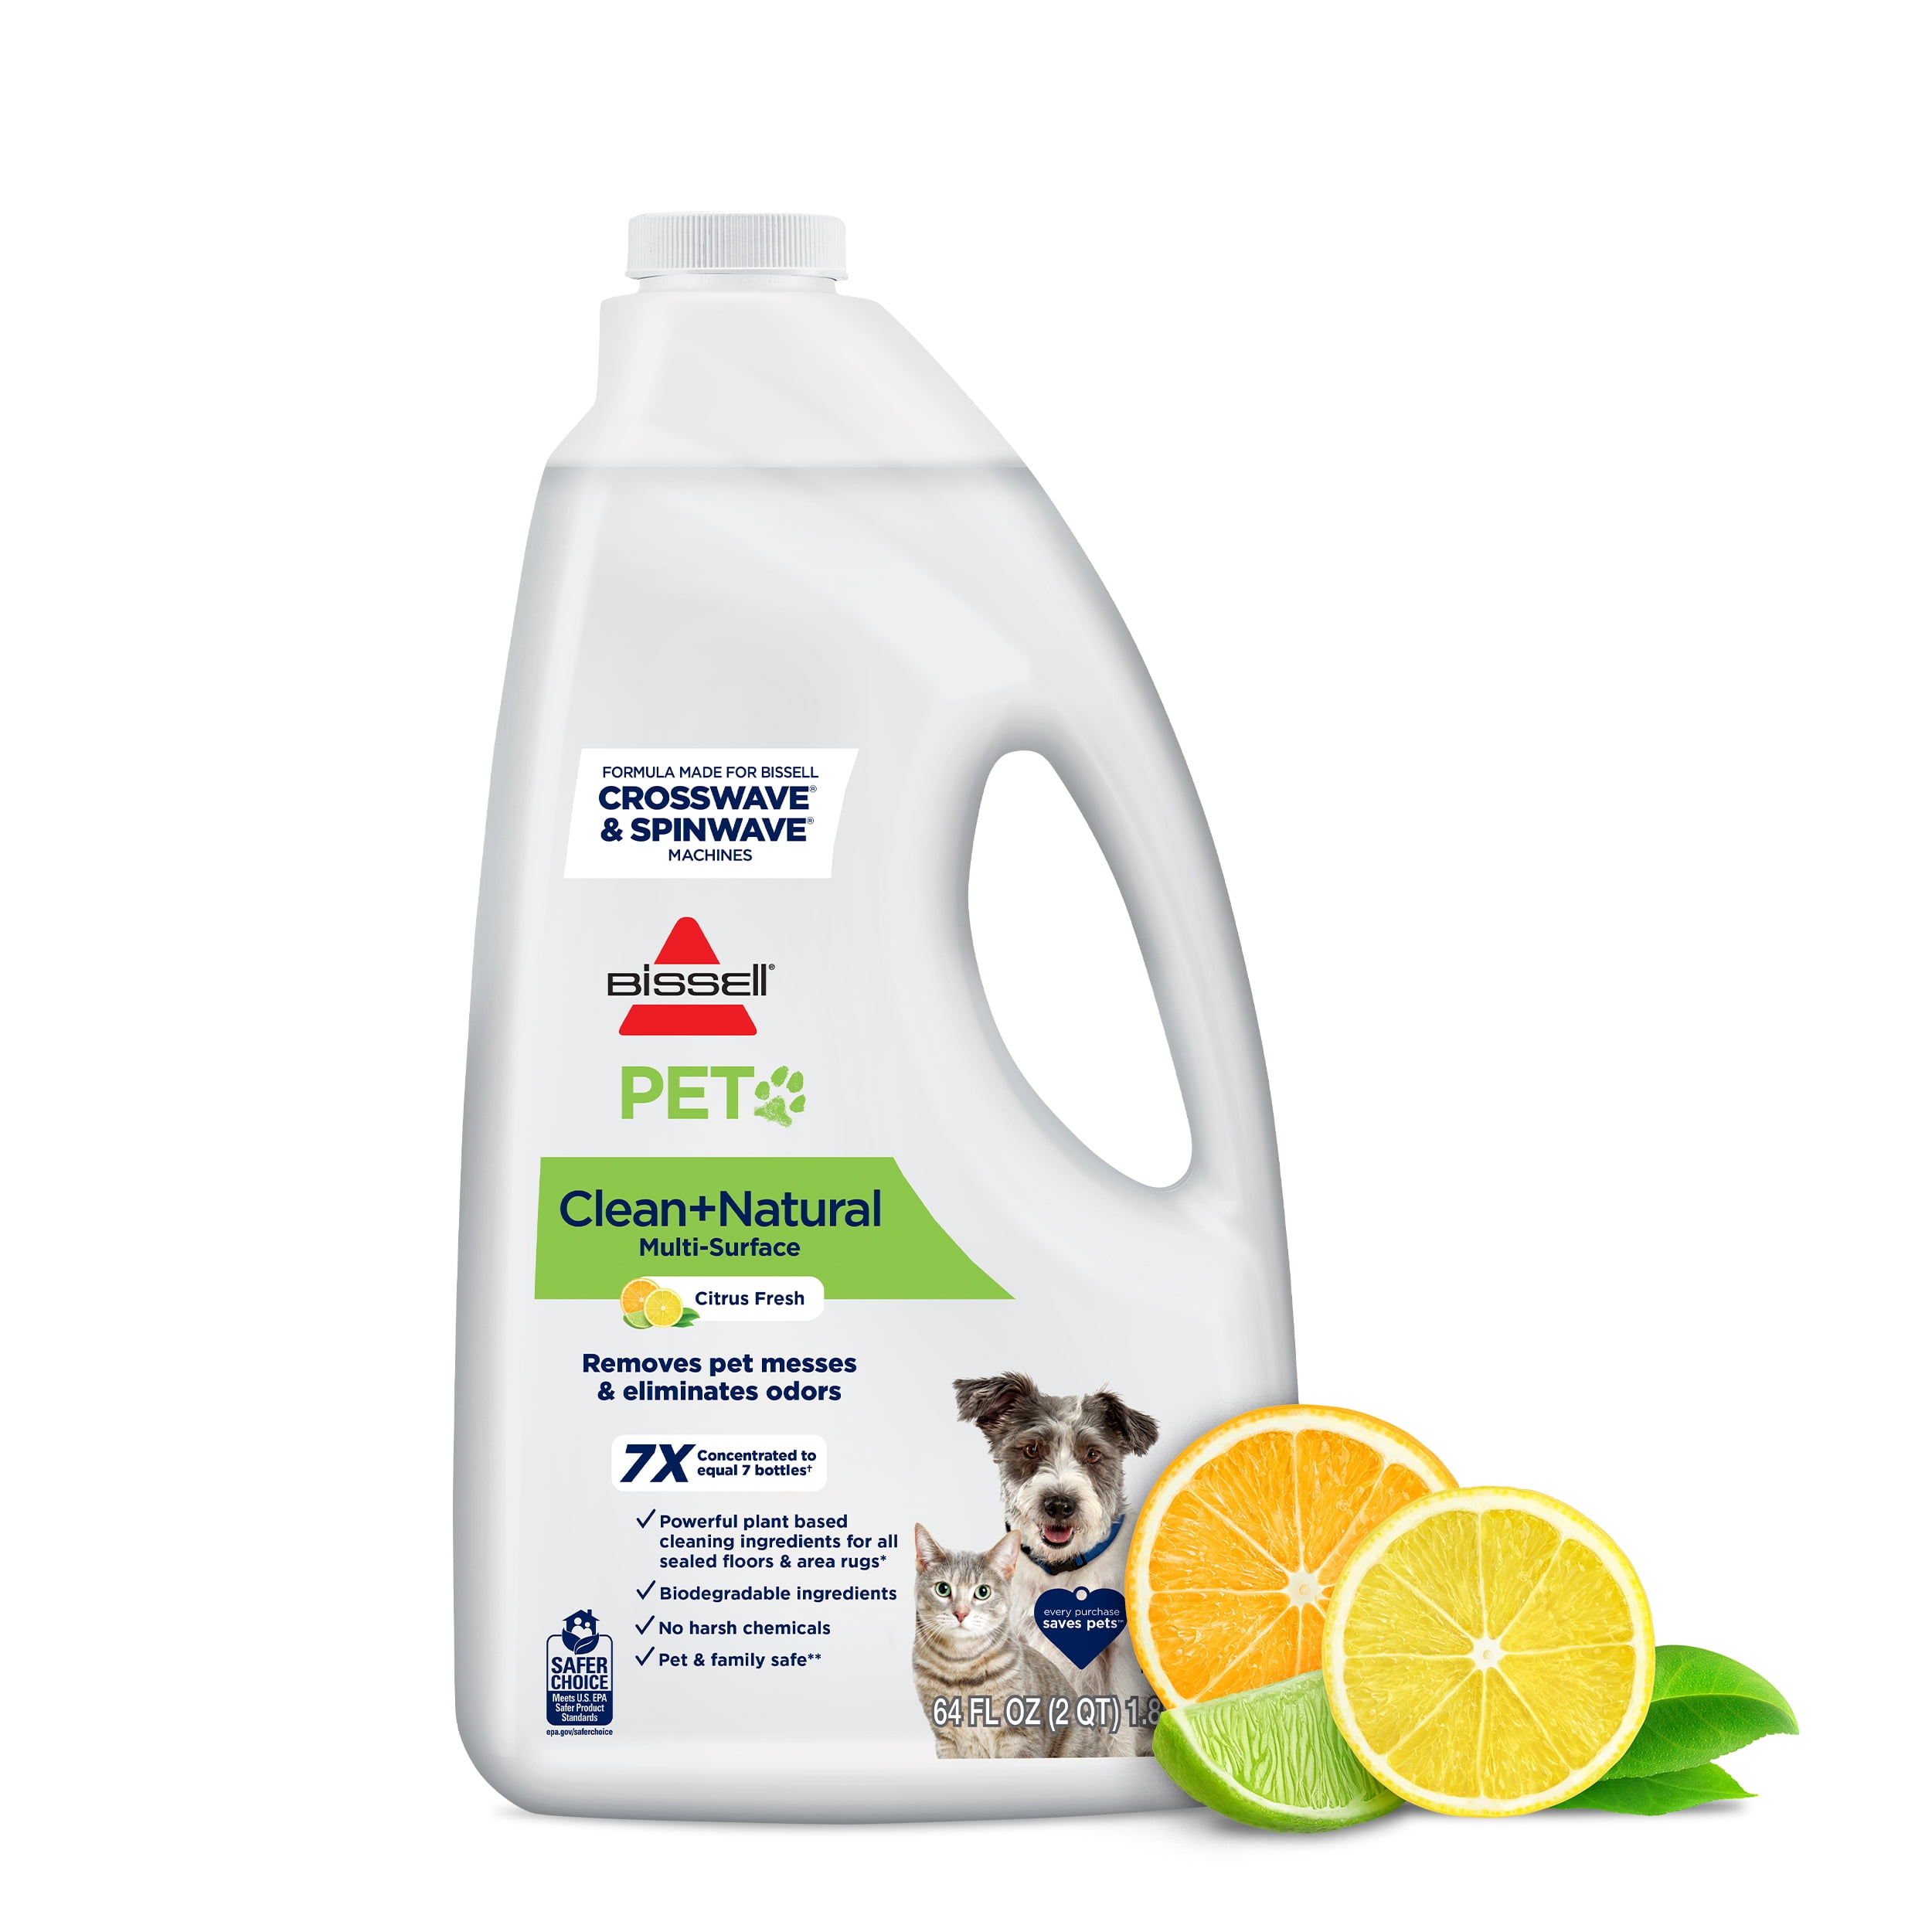 Pet cleaner. Bissell Pet. BUISSELL natural Multi surface Floor Cleaning solution. Clean Pet. Star Brite Multi-surface Pet Odor.